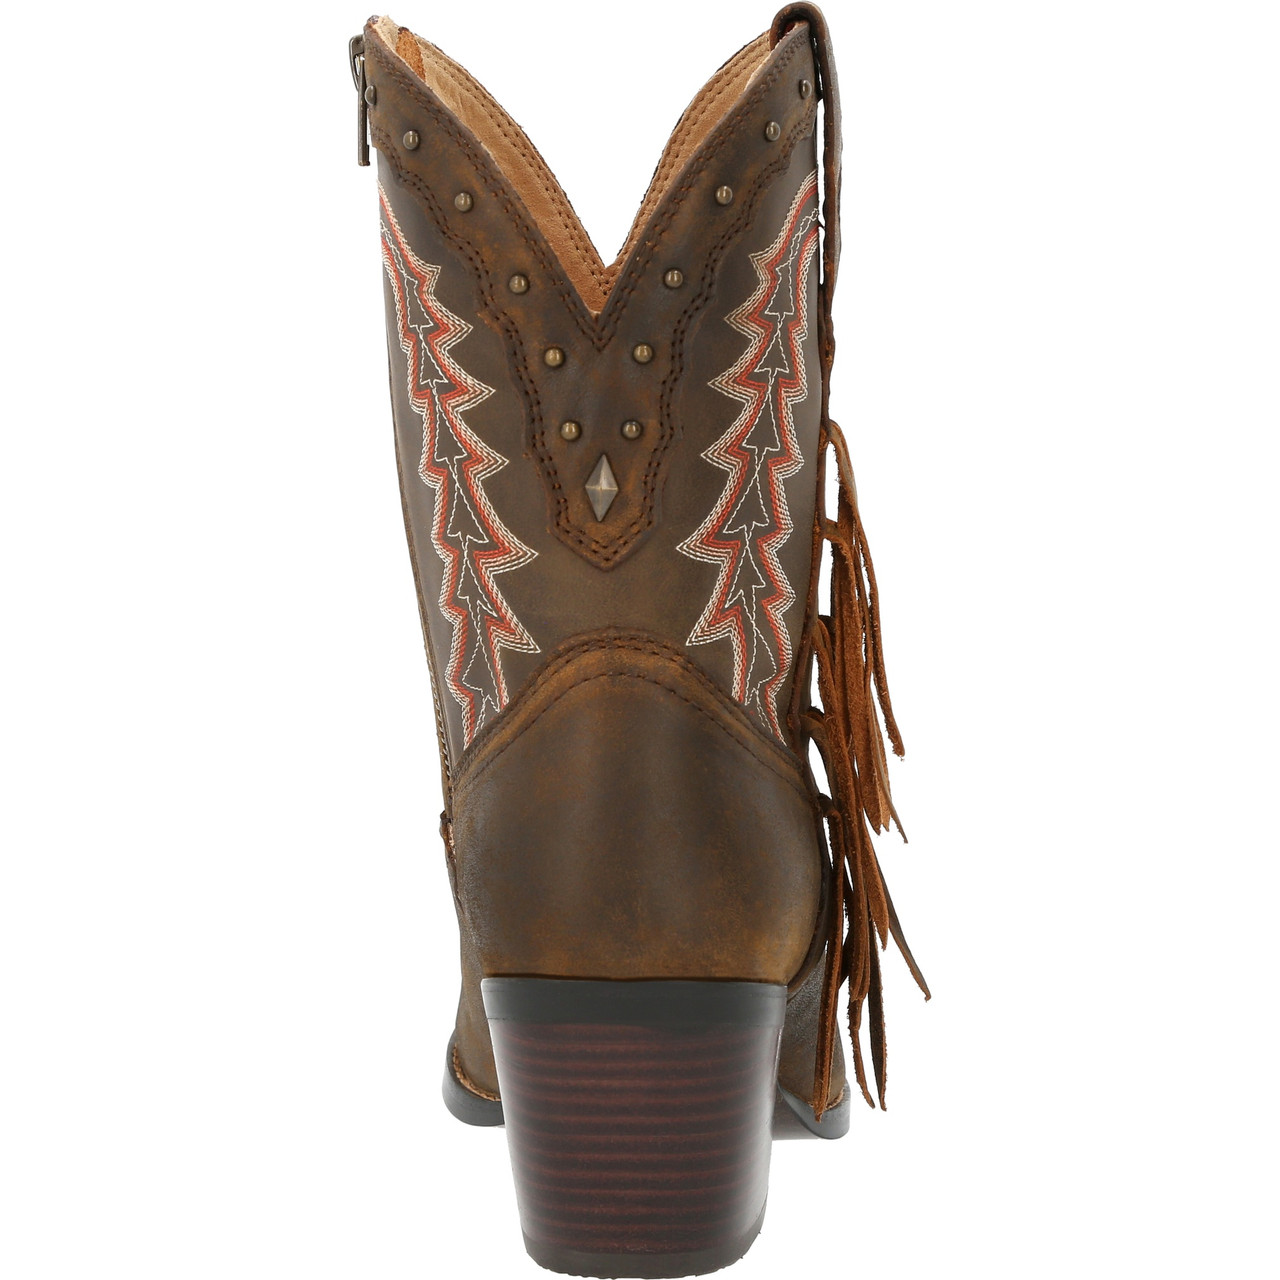 CRUSH™ BY DURANGO® WOMEN'S ROASTED PECAN BOOTIE WESTERN BOOTS DRD0430